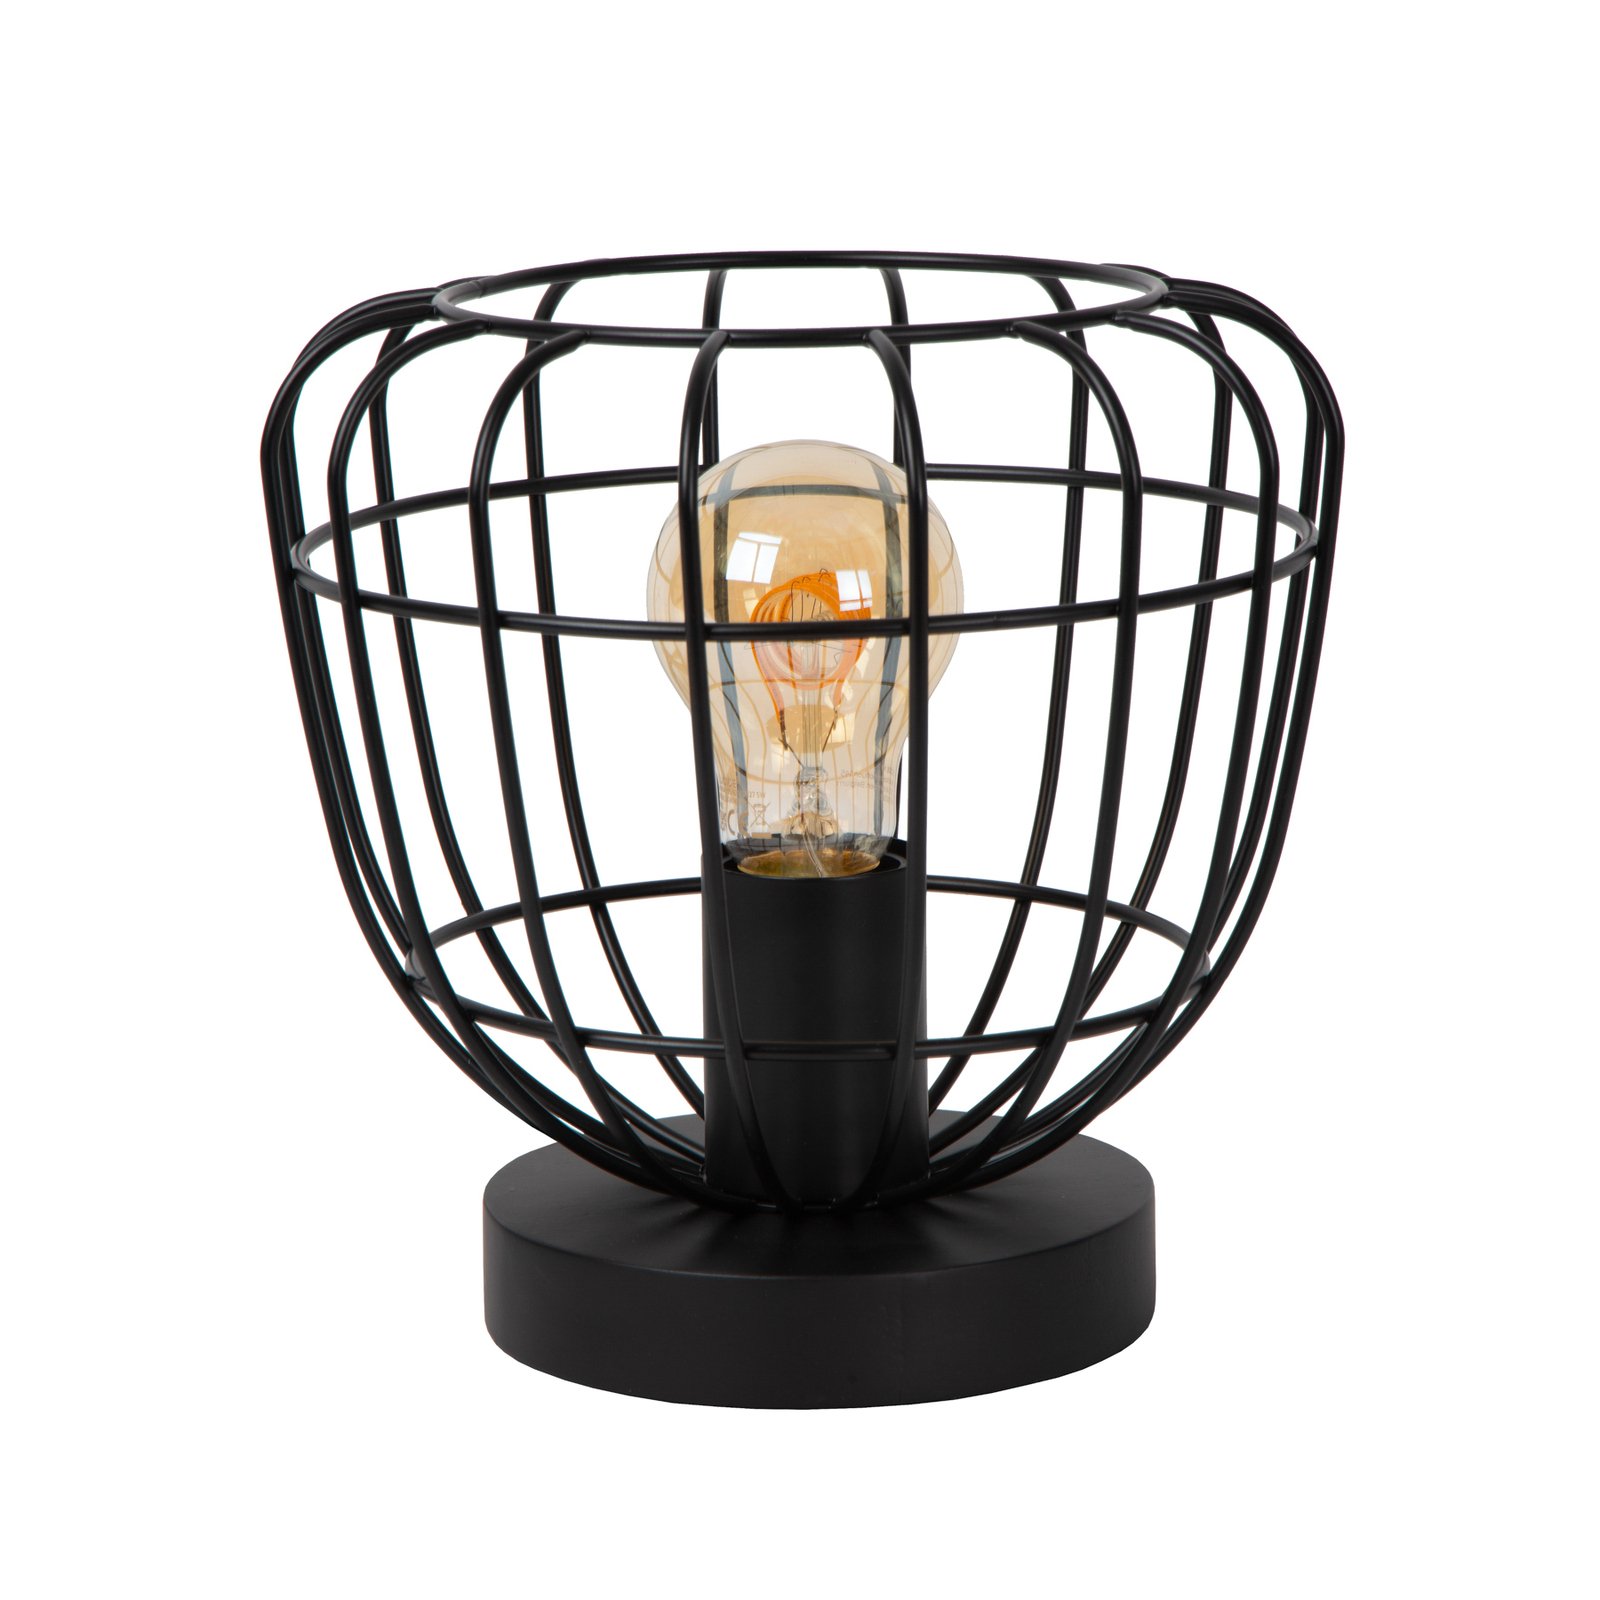 Filox table lamp with a cage lampshade black